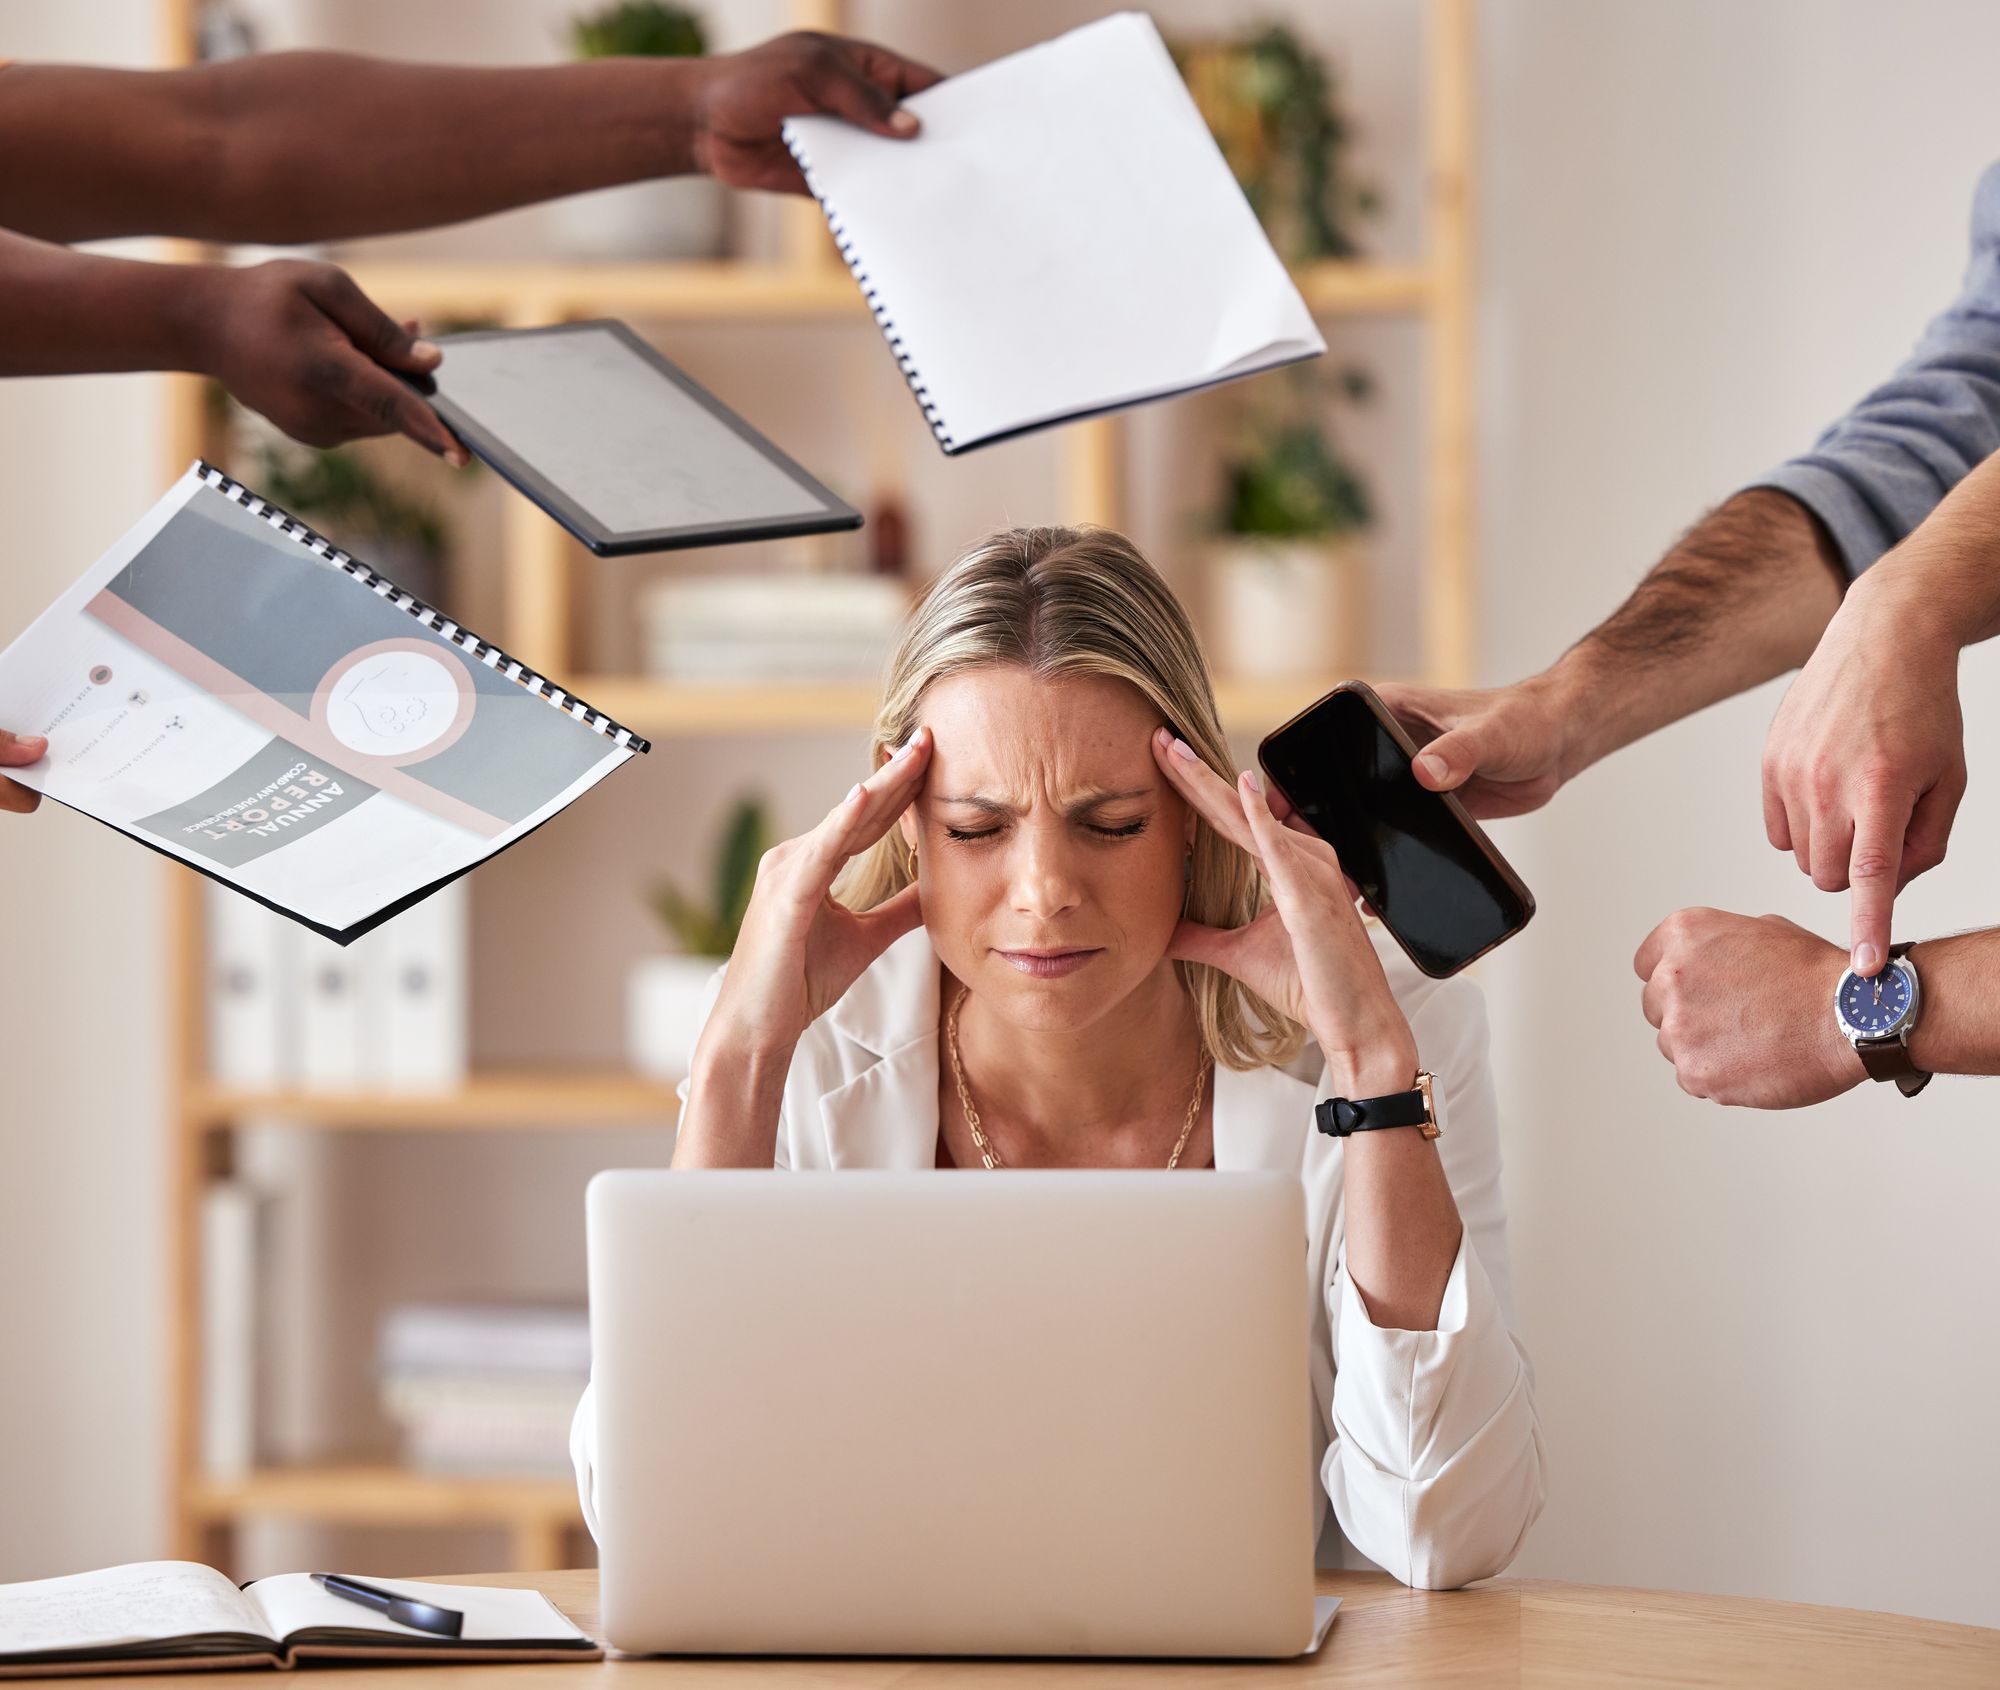 Workplace Stress Management is Important for Employee Mental Health